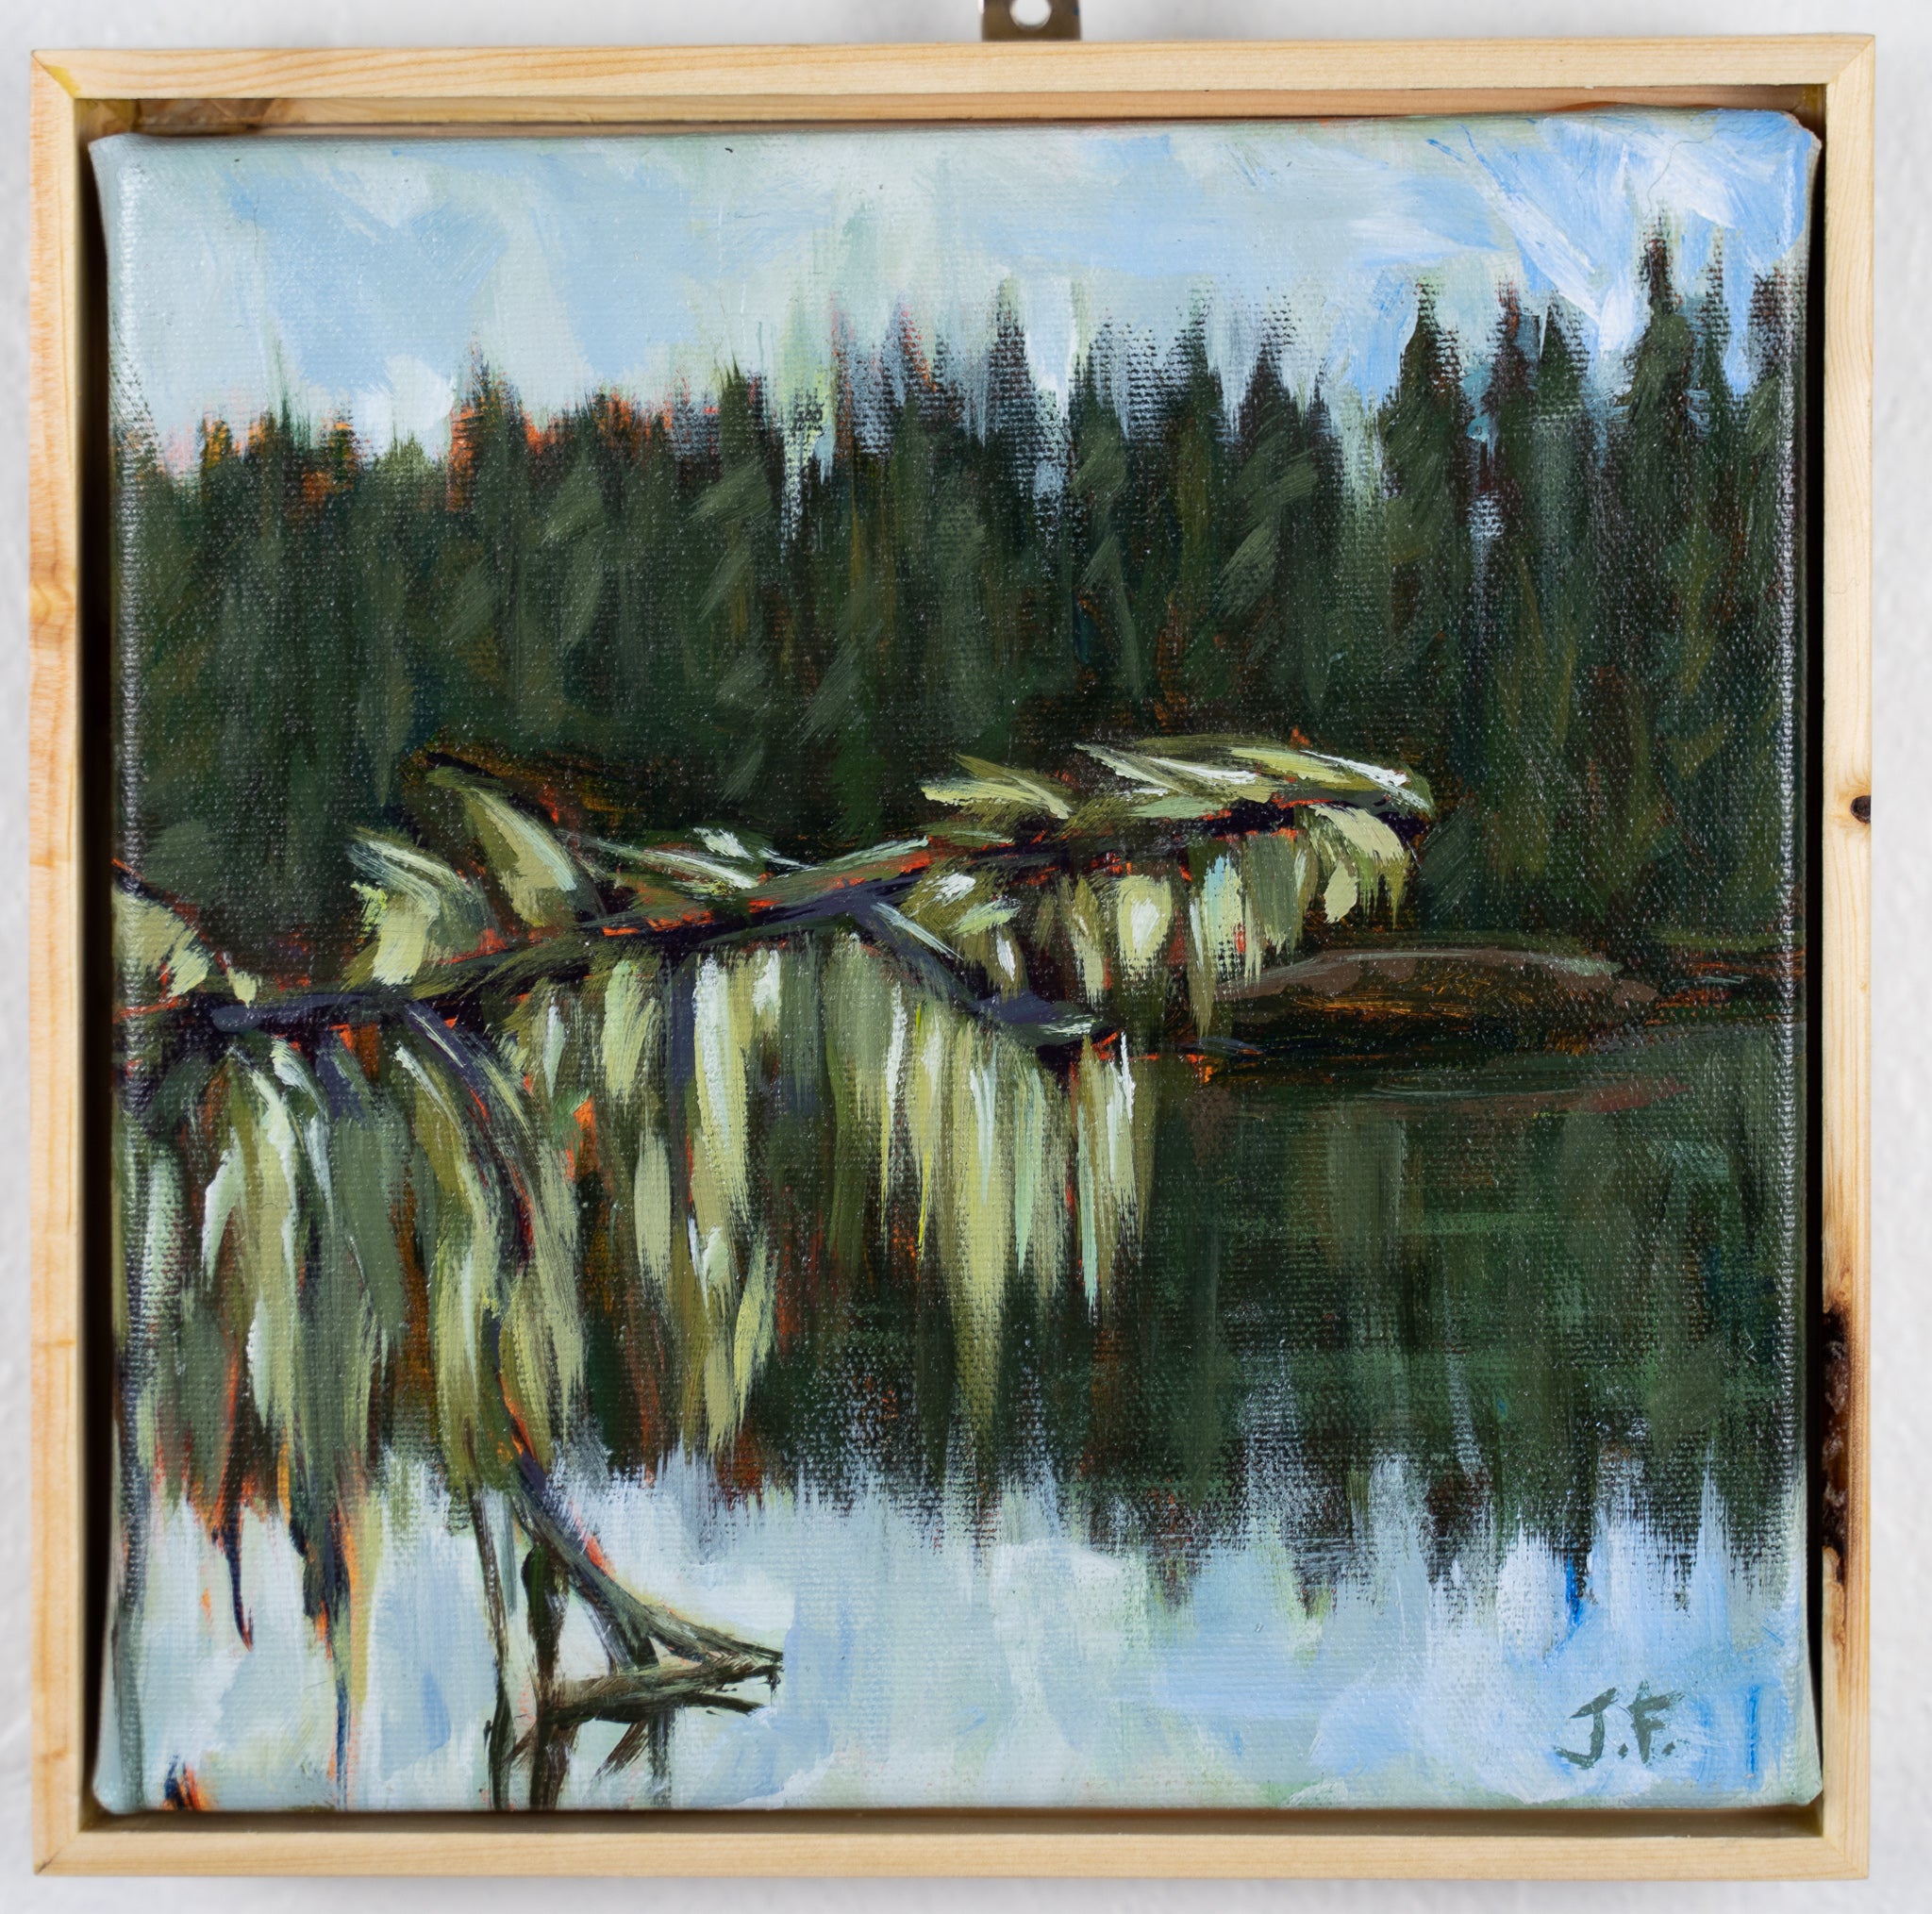 Mossy Reflections | 8 x 8 | Framed Original Painting